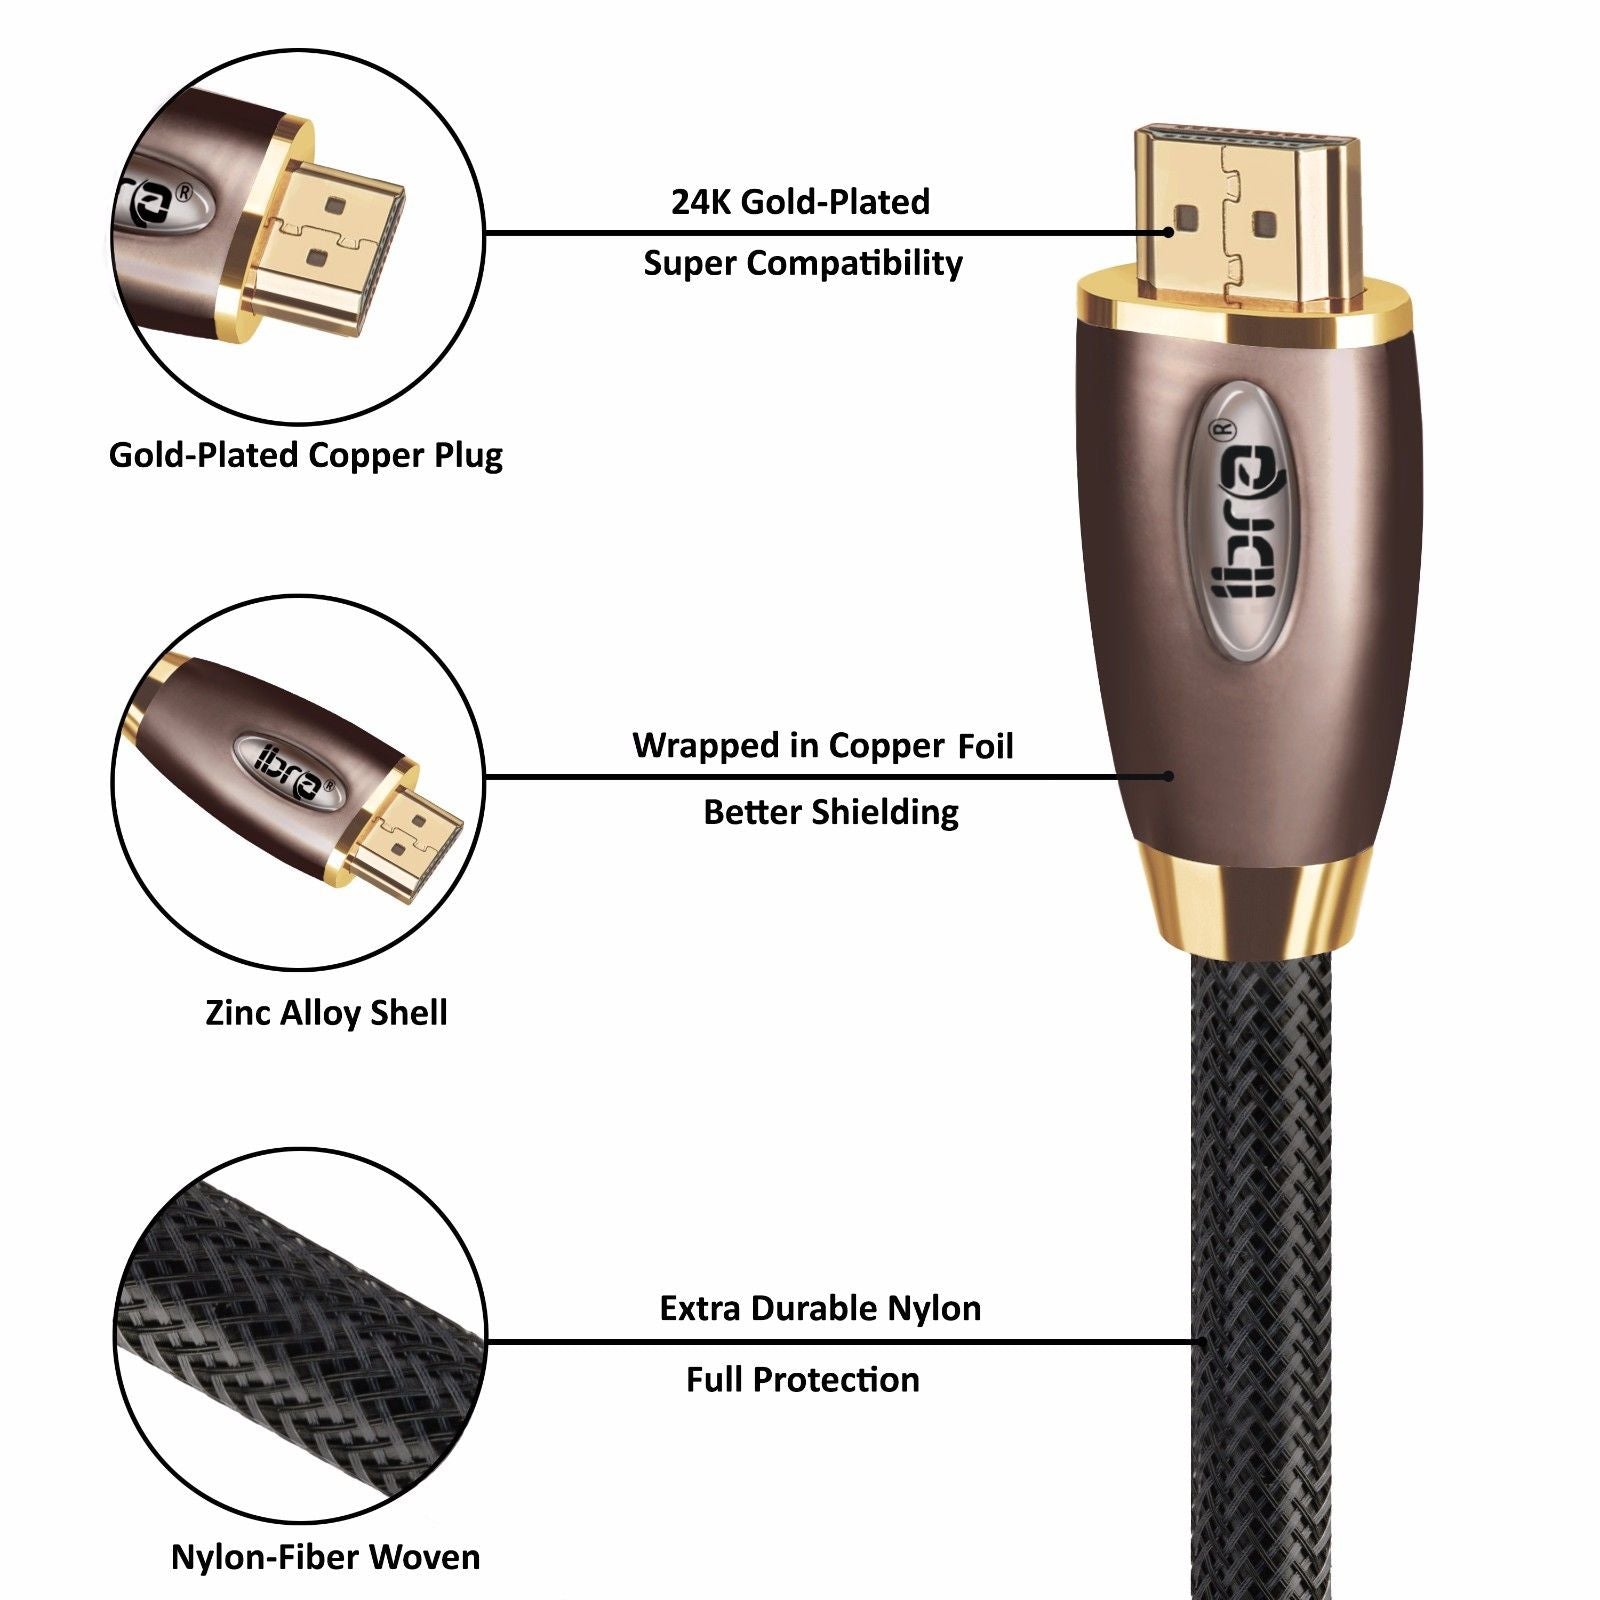 HDMI Cable 4M - 4K UHD HDMI 2.0(4K@60Hz) Ready -18Gbps-28AWG Braided Cord -Gold Plated Connectors -Ethernet,Audio Return -Video 4K 2160p,HD 1080p,3D -Xbox PlayStation PS3 PS4 PC Apple TV -IBRA RED